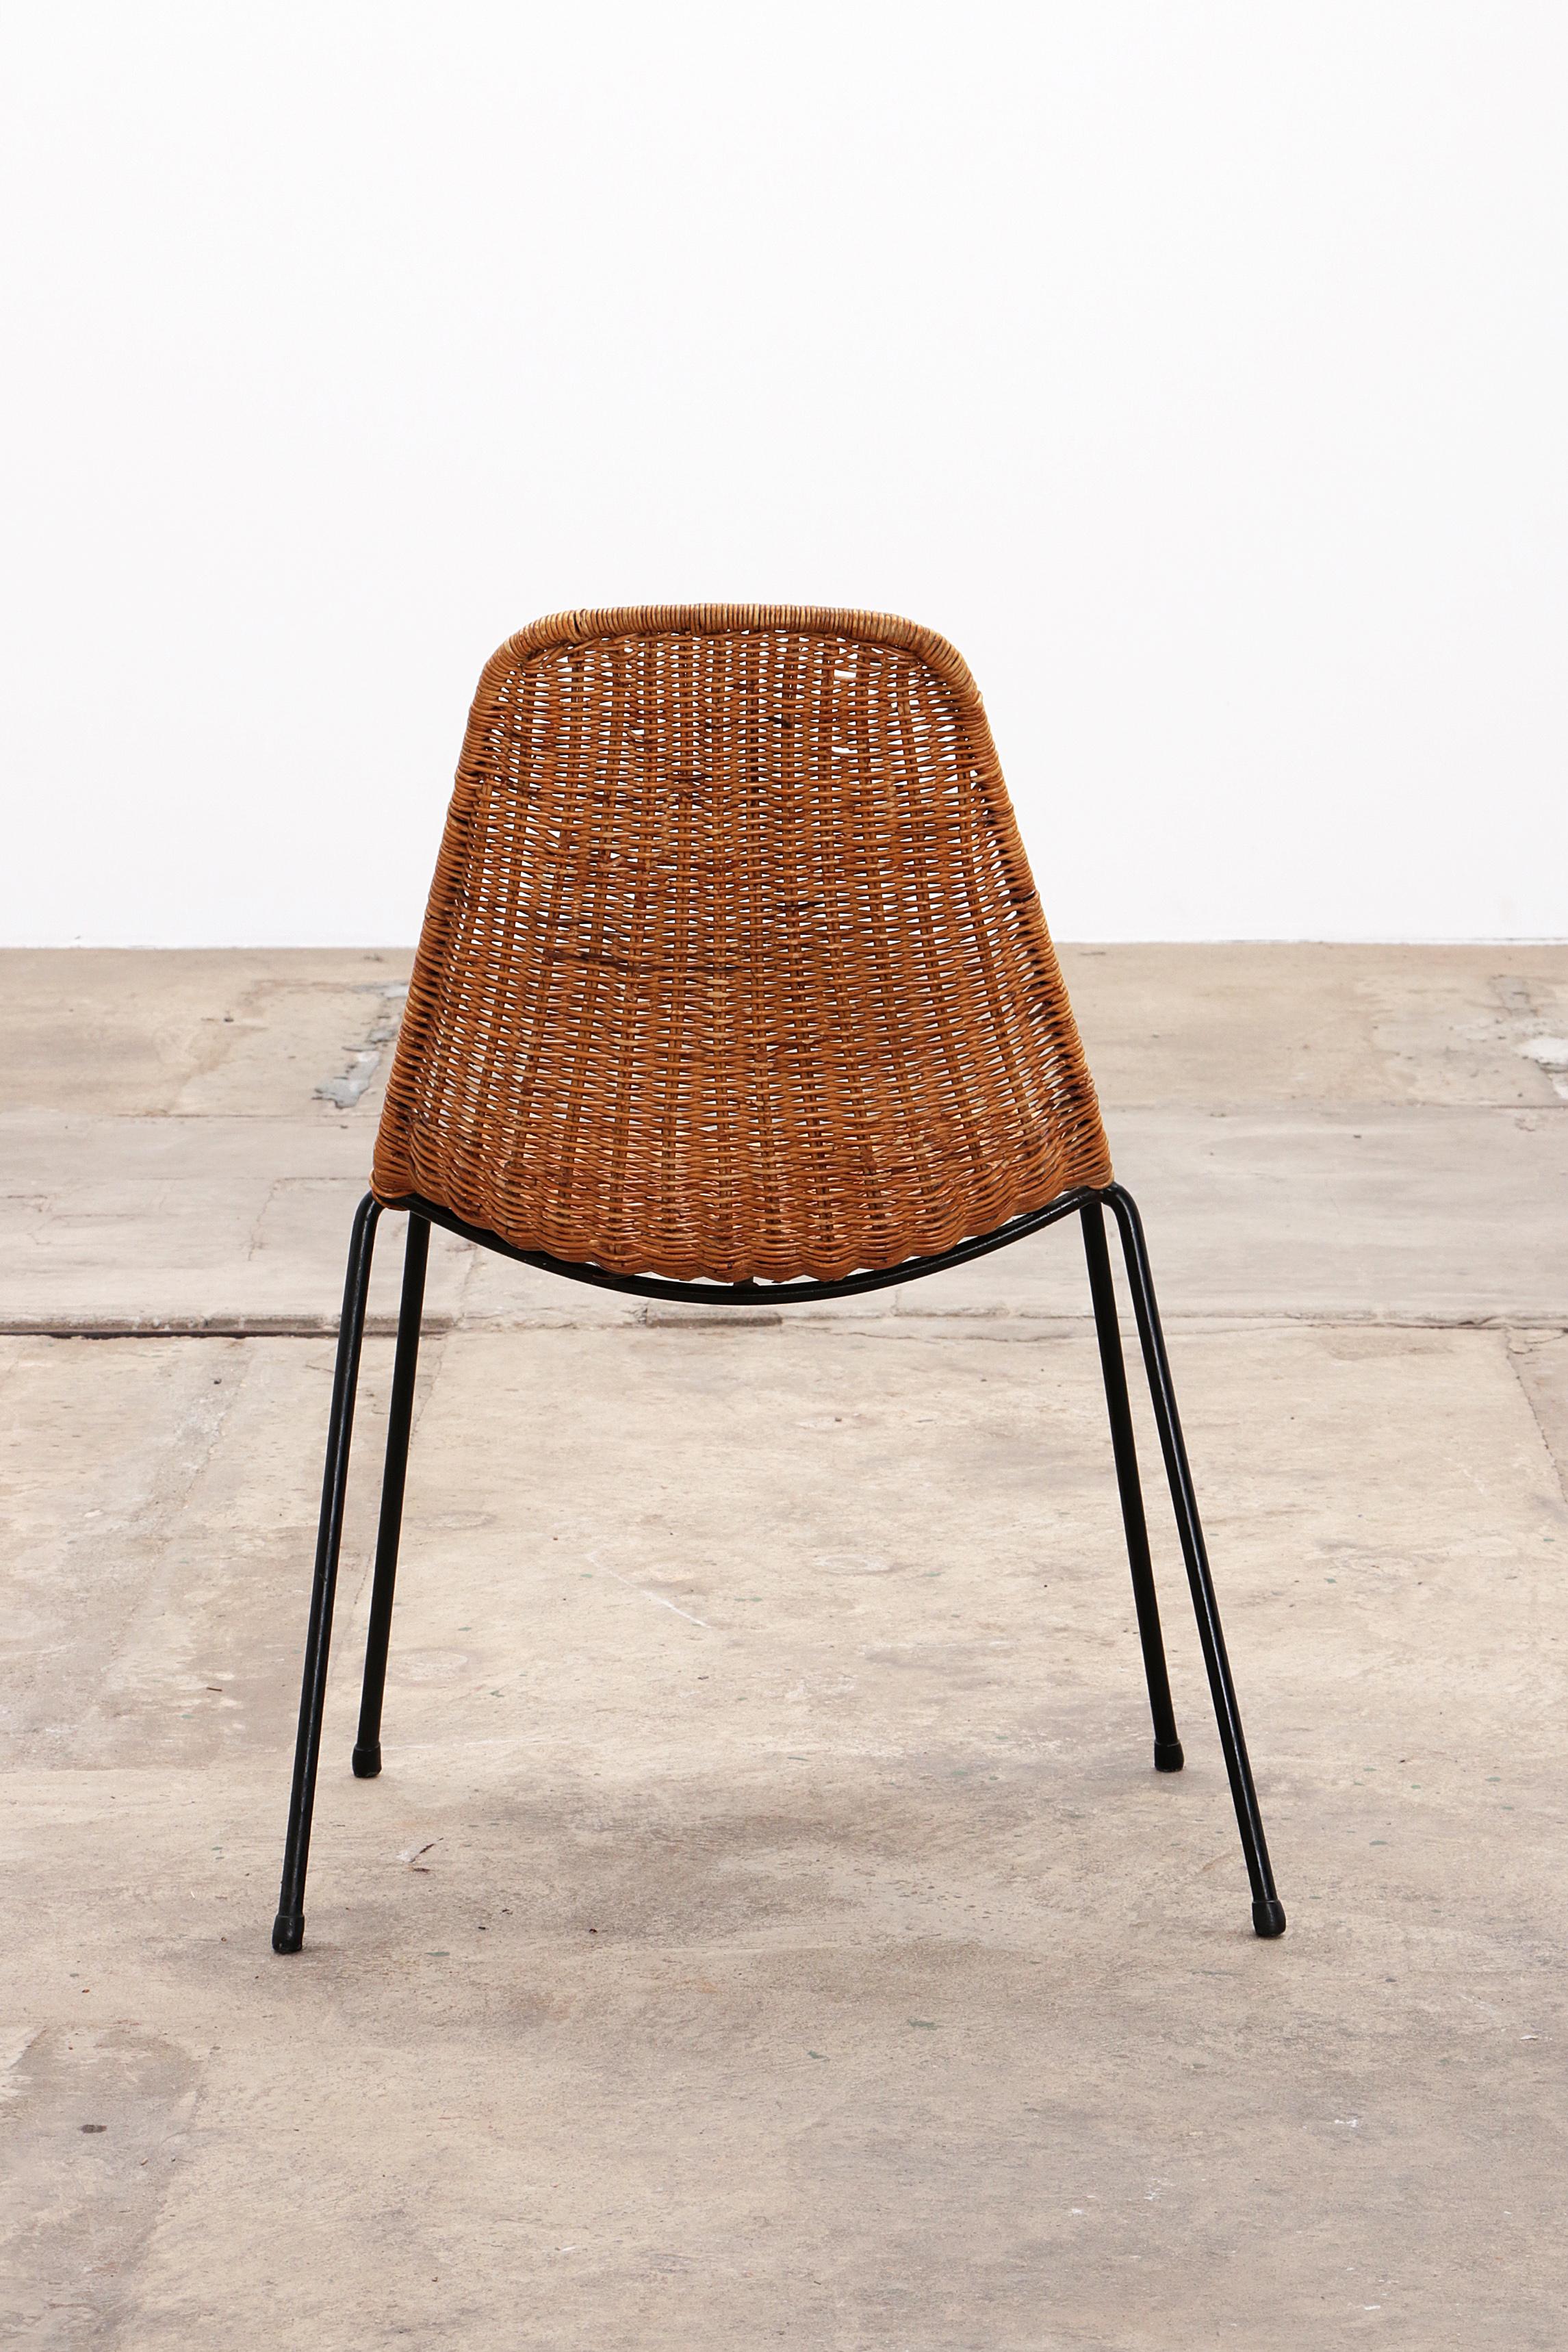 20th Century Midcentury Rattan Basket Chair by Gian Franco Legler For Sale